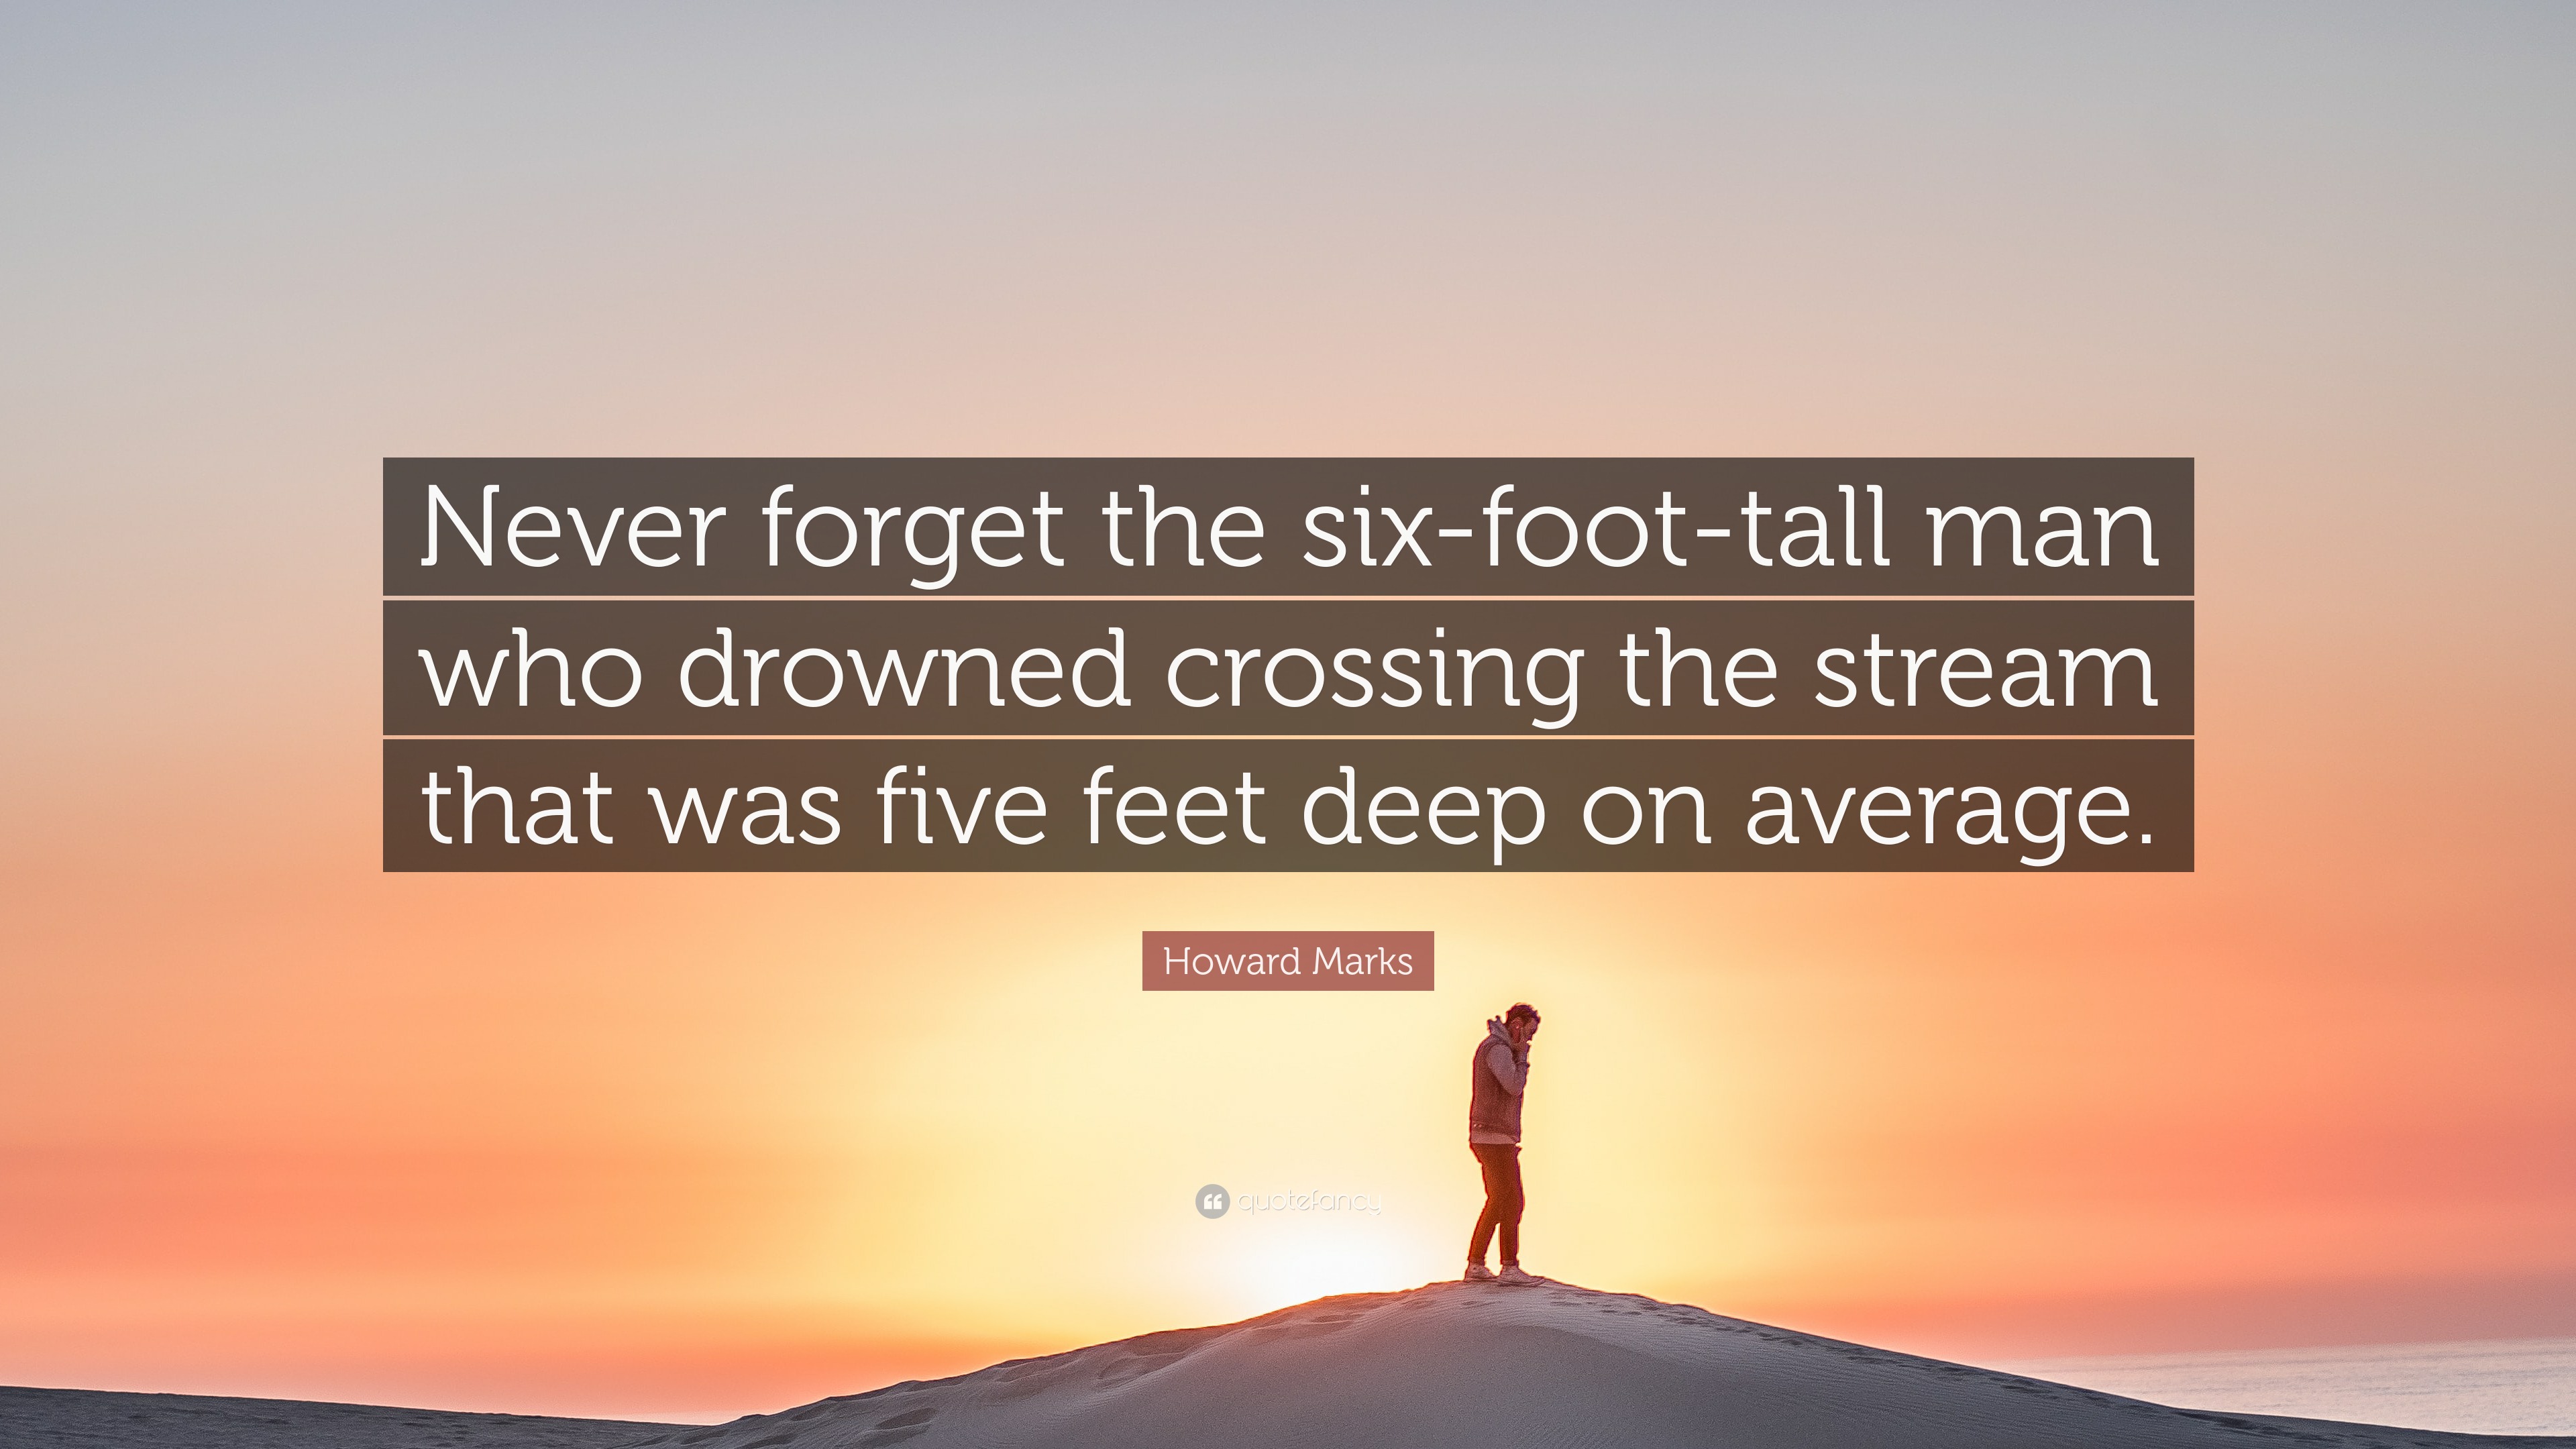 Howard Marks Quote: “Never forget the six-foot-tall man who drowned  crossing the stream that